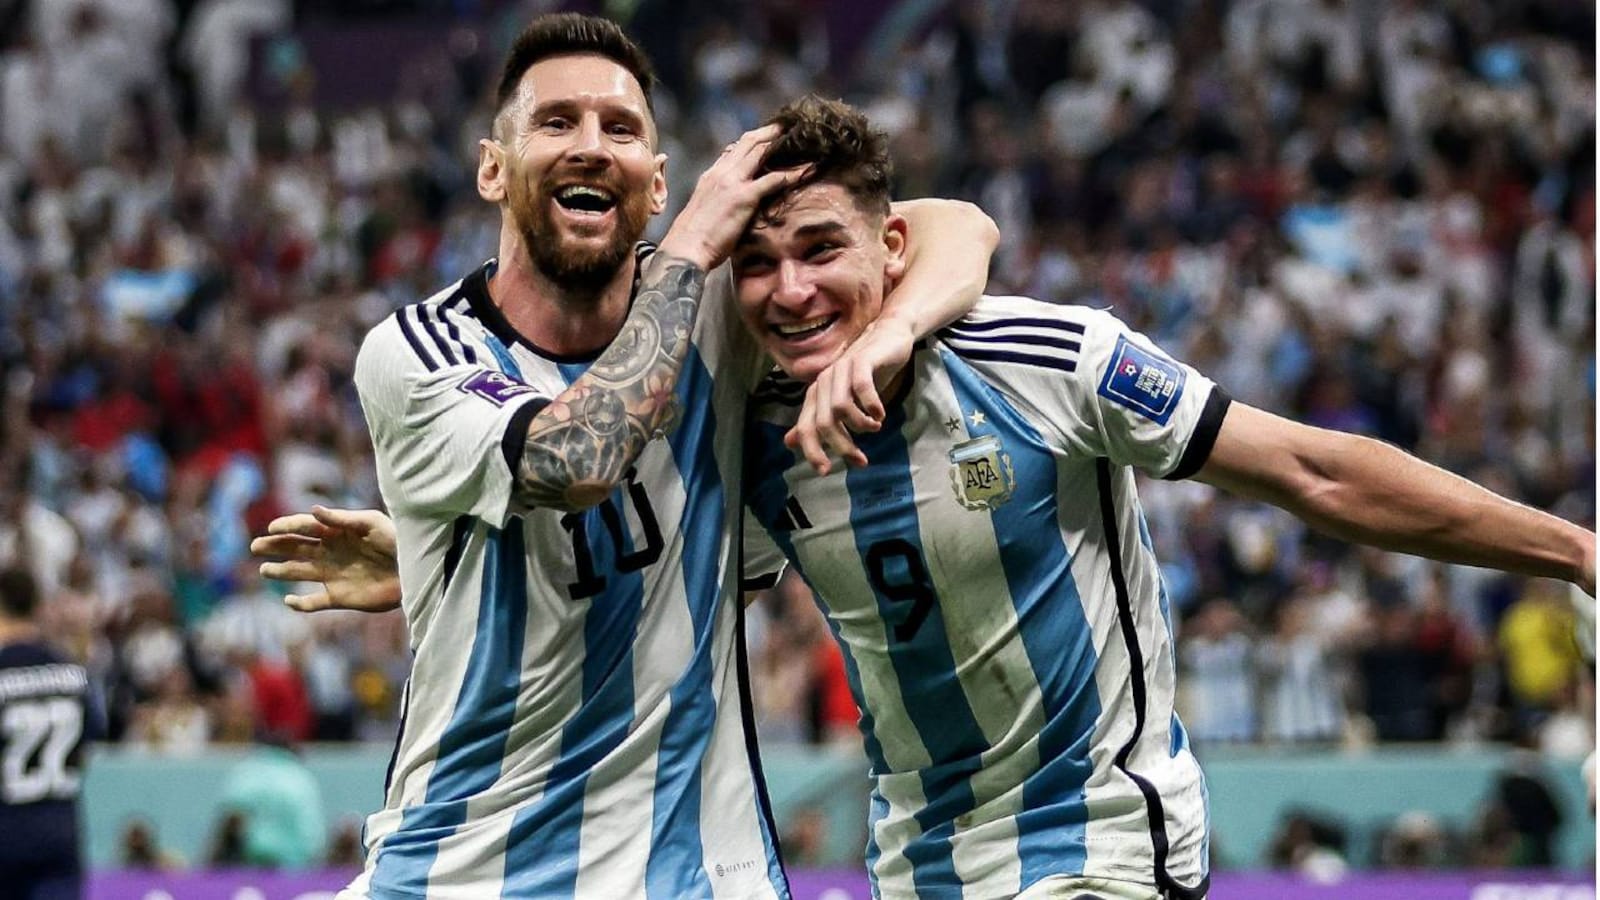 Alvarez: Playing alongside Messi for Argentina was a dream